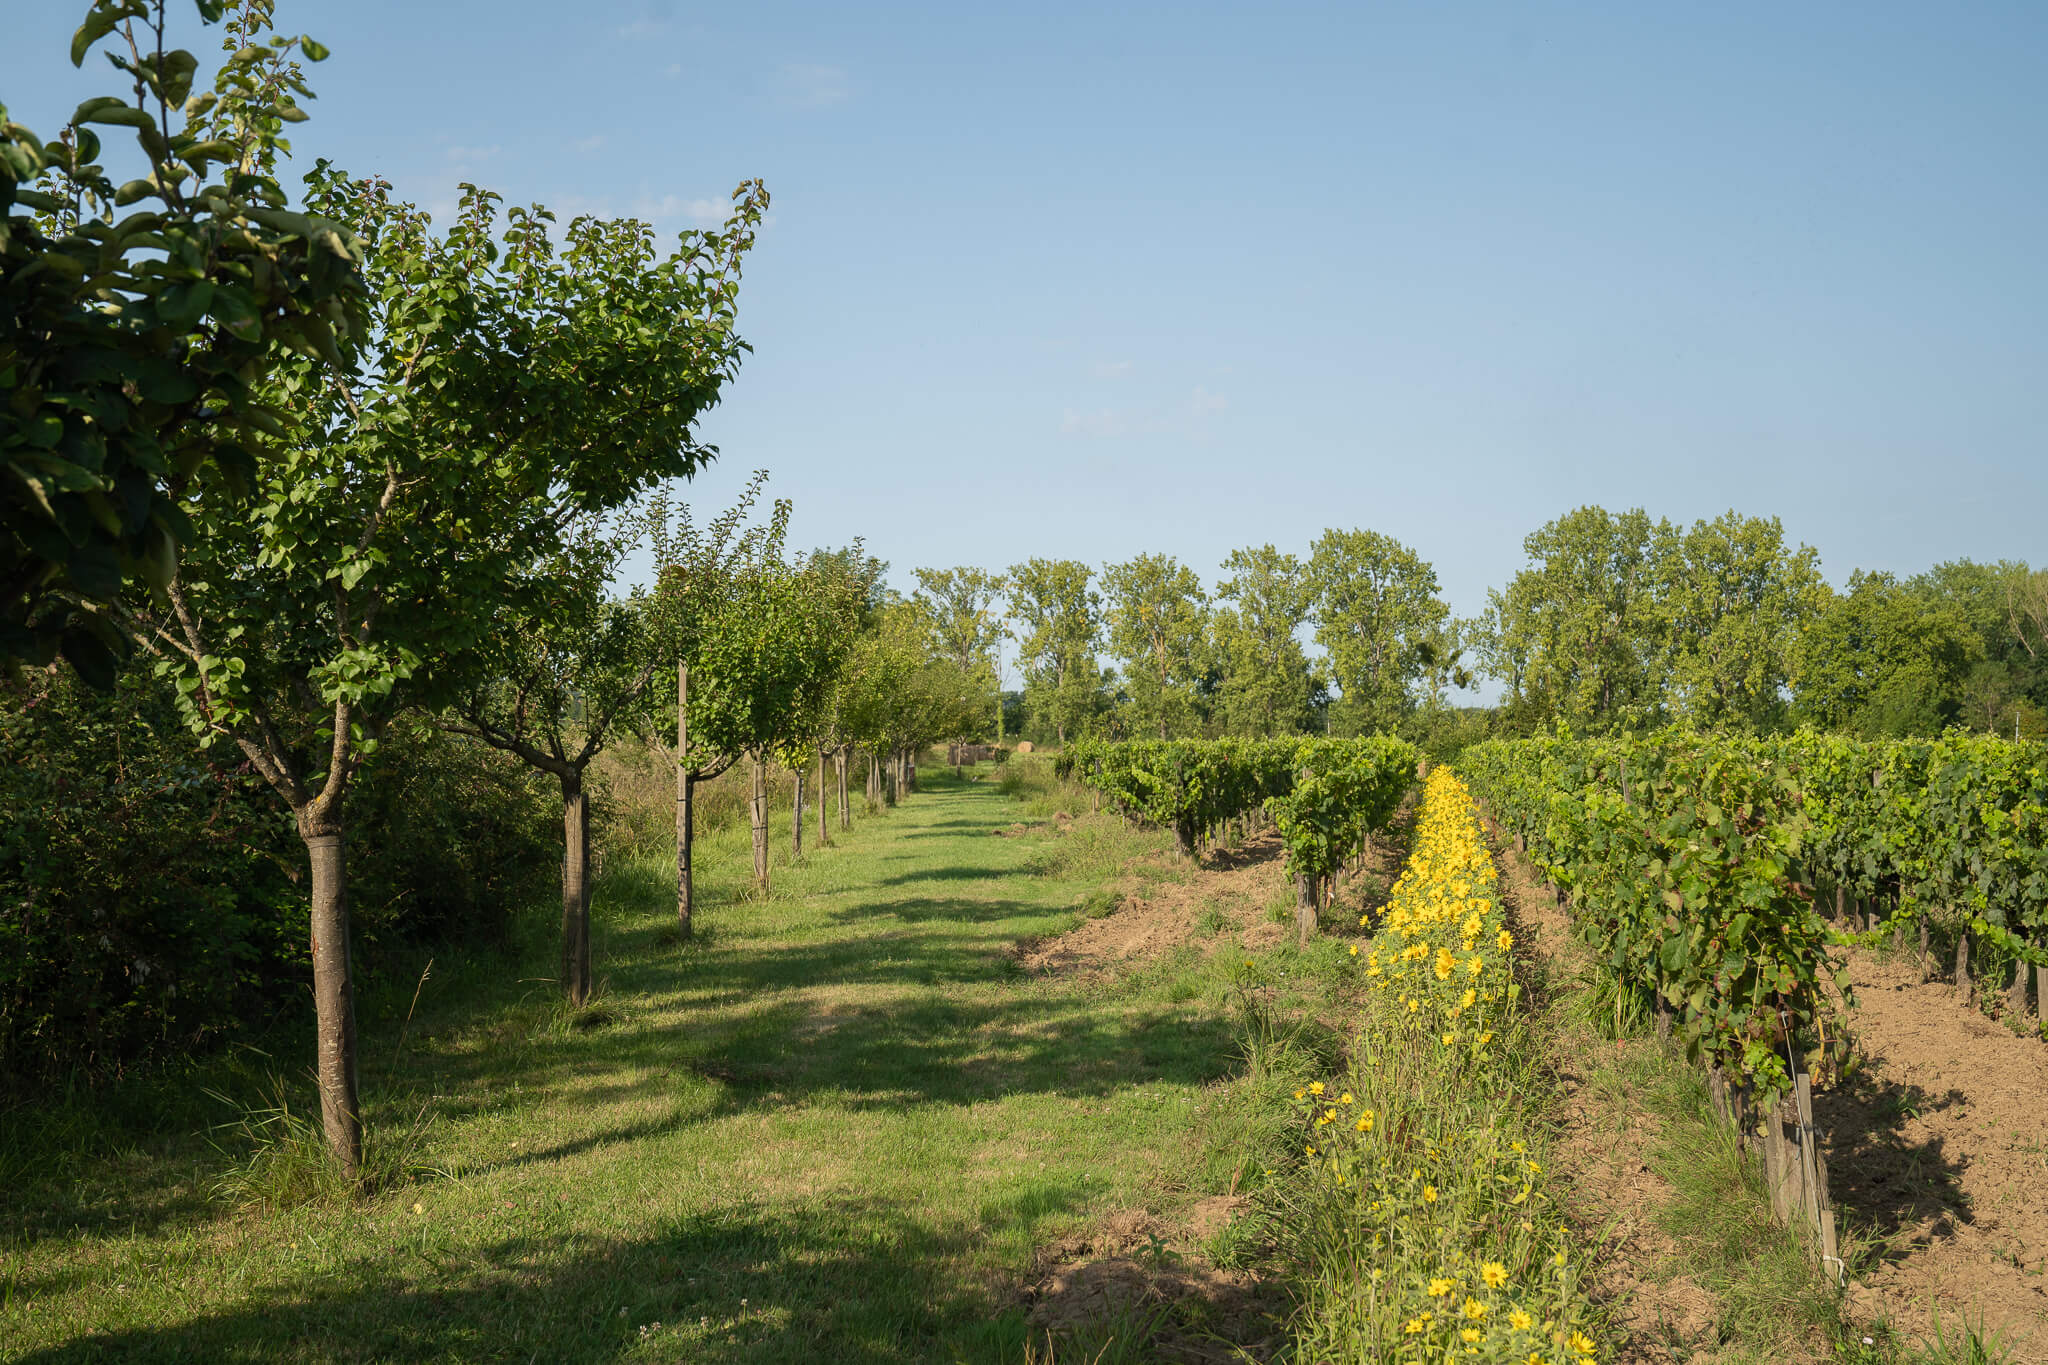 Agroforestry and the vineyards of Bordeaux